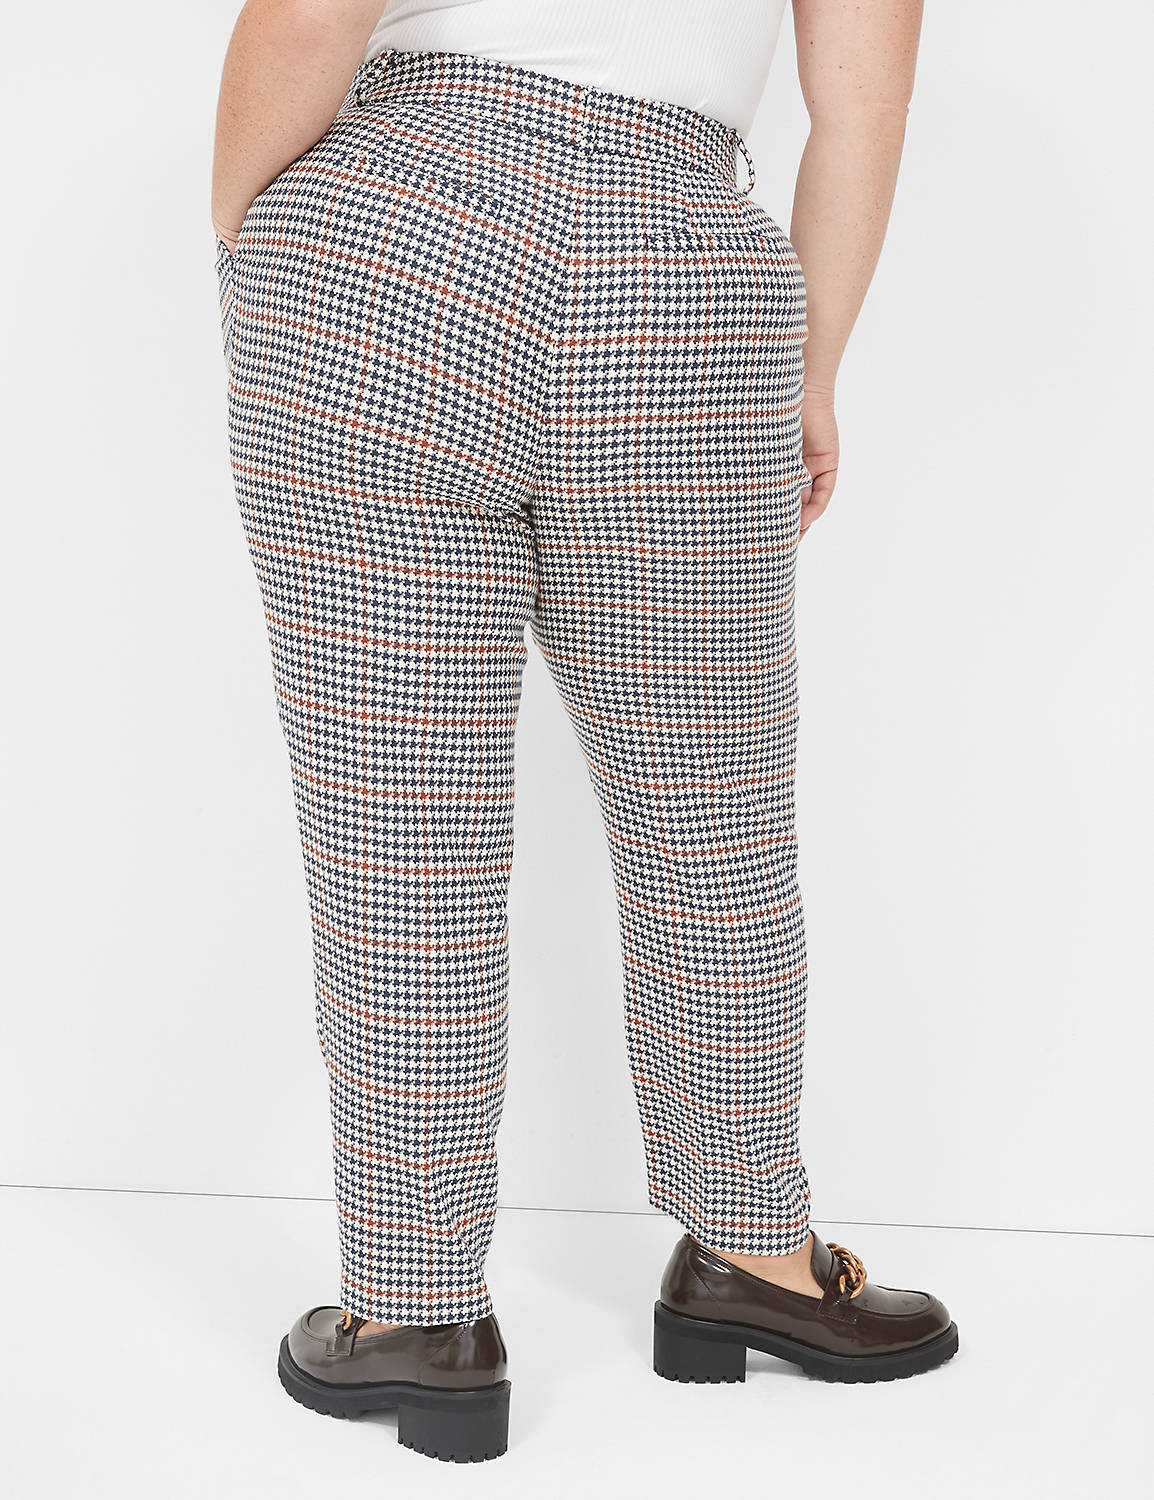 THE PLEATED TAPERED LEG PANT - HOUN Product Image 2